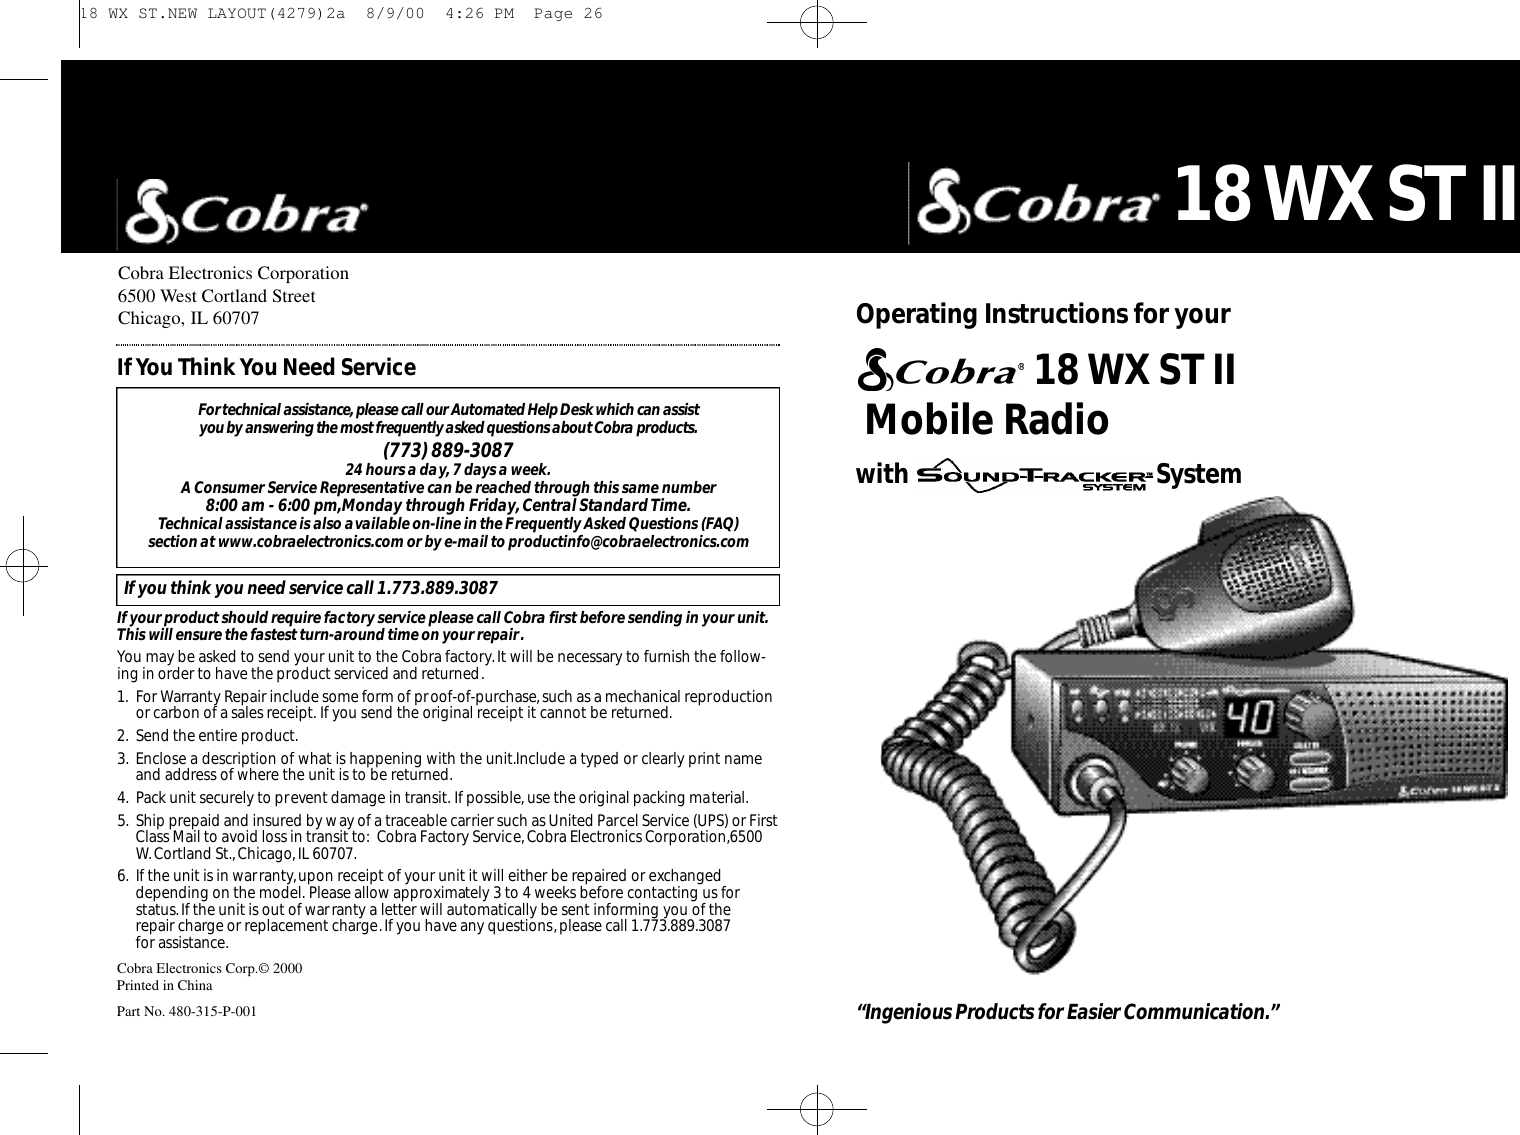 Cobra Electronics Corporation6500 West Cortland StreetChicago, IL 60707Cobra Electronics Corp.© 2000Printed in ChinaPart No. 480-315-P-001For te c h n i c al assistance,please call our Au to m a t ed Help Desk which can assist you by answering the most fre q u e n t l y asked questions about Co b r a prod u ct s.(773) 889-3087 24 hours a day, 7 days a week.A Consumer Service Representative can be reached through this same number 8:00 am - 6:00 pm,Monday through Friday,Central Standard Time.Technical assistance is also available on-line in the Frequently Asked Questions (FAQ) section at www.cobraelectronics.com or by e-mail to productinfo@cobraelectronics.comIf you think you need service call 1.773.889.3087If your product should require factory service please call Cobra first before sending in your unit.This will ensure the fastest turn-around time on your repair.You may be asked to send your unit to the Cobra factory.It will be necessary to furnish the follow-ing in order to have the product serviced and returned.1. For Warranty Repair include some form of proof-of-purchase,such as a mechanical reproductionor carbon of a sales receipt. If you send the original receipt it cannot be returned.2. Send the entire product.3. Enclose a description of what is happening with the unit.Include a typed or clearly print nameand address of where the unit is to be returned.4. Pack unit securely to prevent damage in transit. If possible, use the original packing material.5. Ship prepaid and insured by way of a traceable carrier such as United Parcel Service (UPS) or FirstClass Mail to avoid loss in transit to: Cobra Factory Service,Cobra Electronics Corporation,6500W. Cortland St.,Chicago,IL 60707.6. If the unit is in warranty,upon receipt of your unit it will either be repaired or exchangeddepending on the model. Please allow approximately 3 to 4 weeks before contacting us for status.If the unit is out of warranty a letter will automatically be sent informing you of the repair charge or replacement charge.If you have any questions,please call 1.773.889.3087 for assistance.IfYou Think You Need Service“Ingenious Prod u cts for Easier Co m m u n i ca t i o n .”18 WX ST IIMobile Radio with  SystemO pe rating Instru ctions for your 18 WX ST II 18 WX ST.NEW LAYOUT(4279)2a  8/9/00  4:26 PM  Page 26